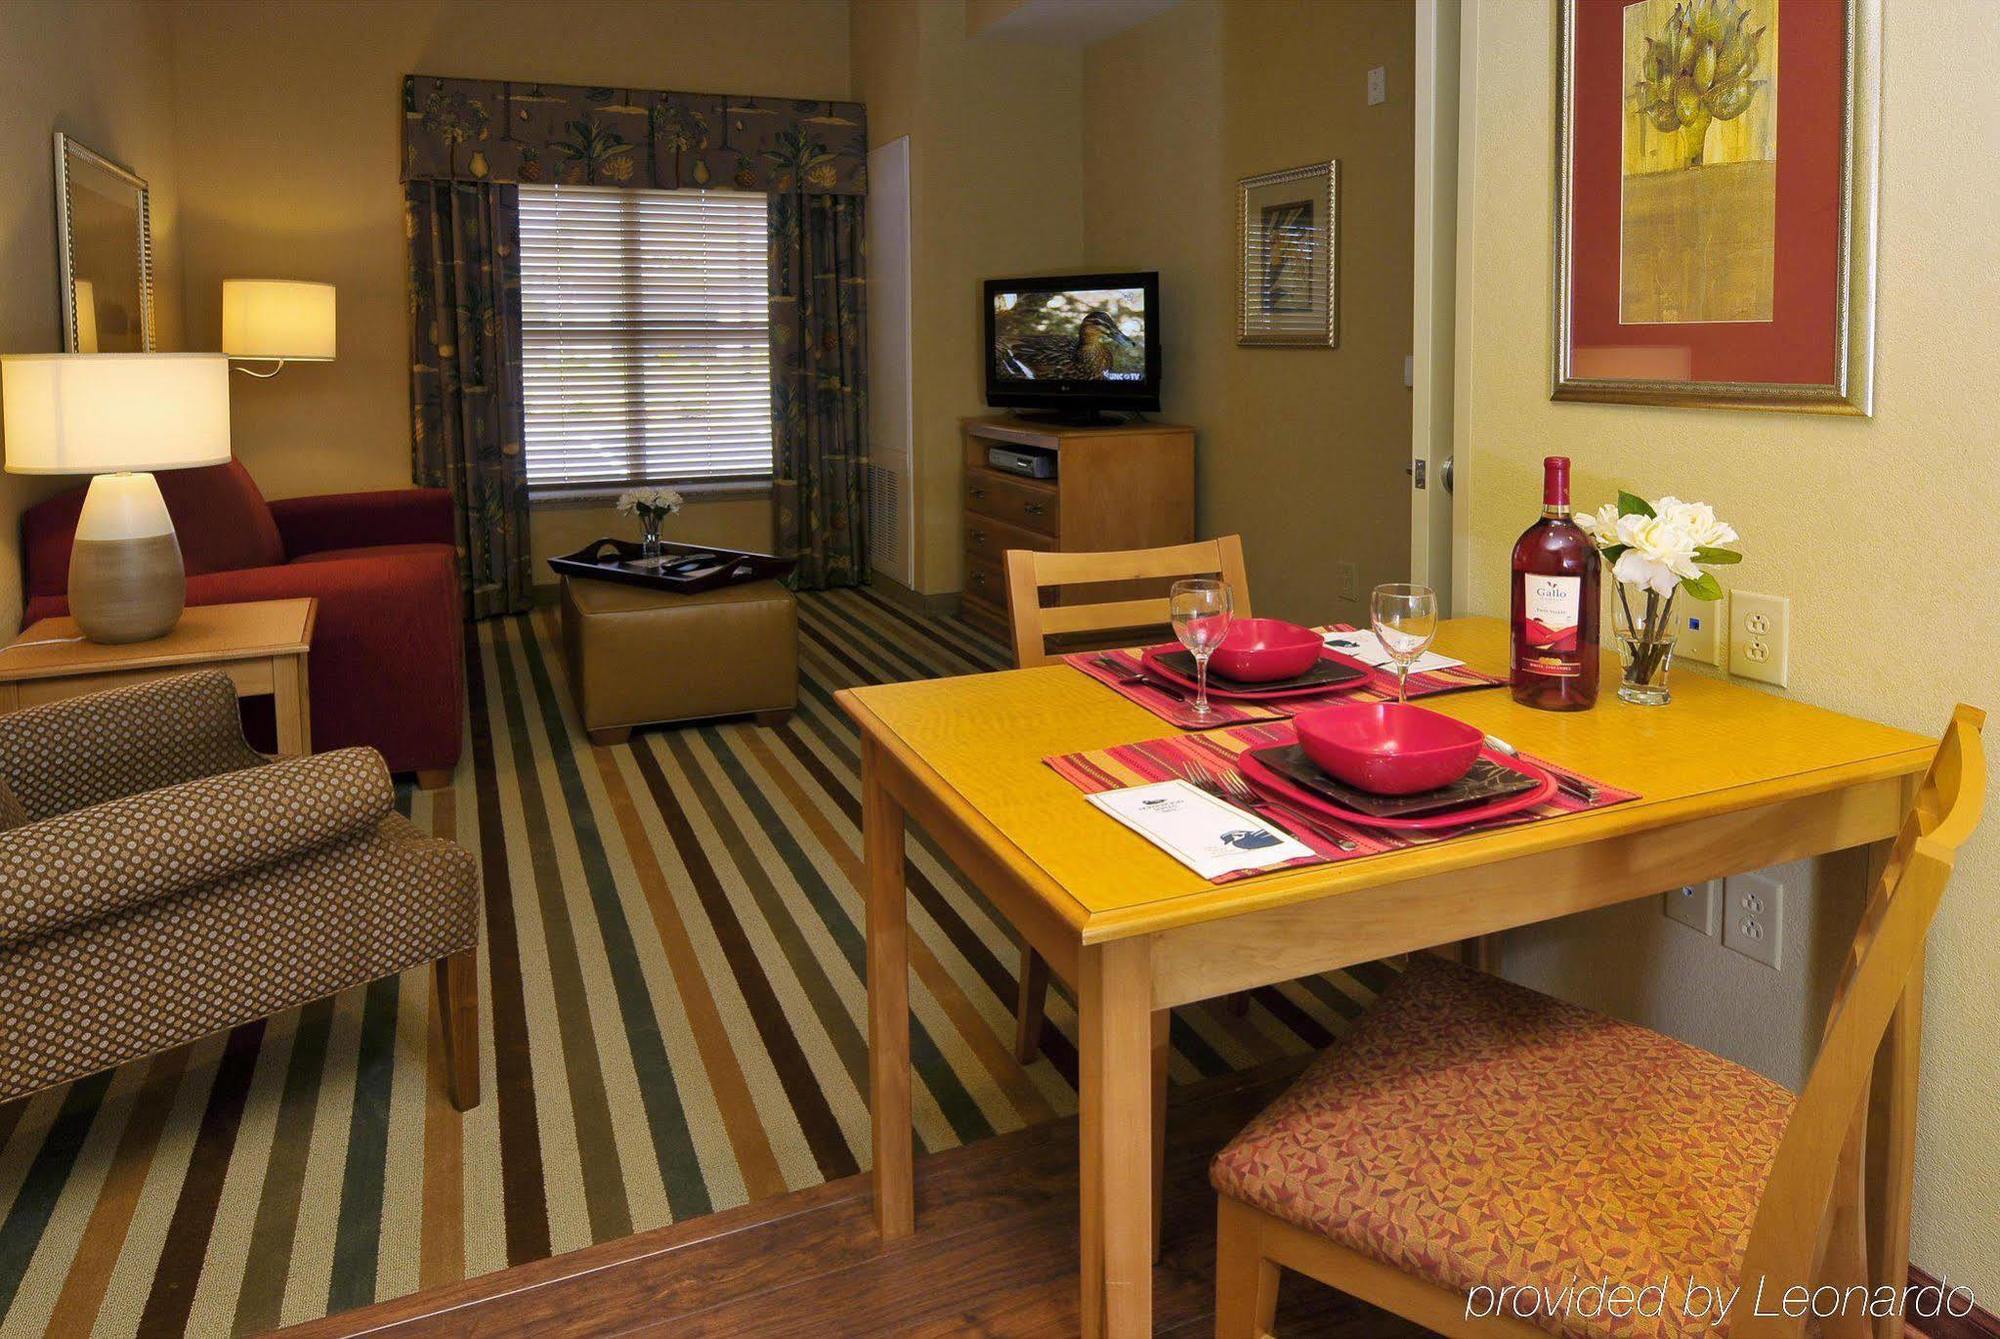 Homewood Suites By Hilton Greenville Room photo